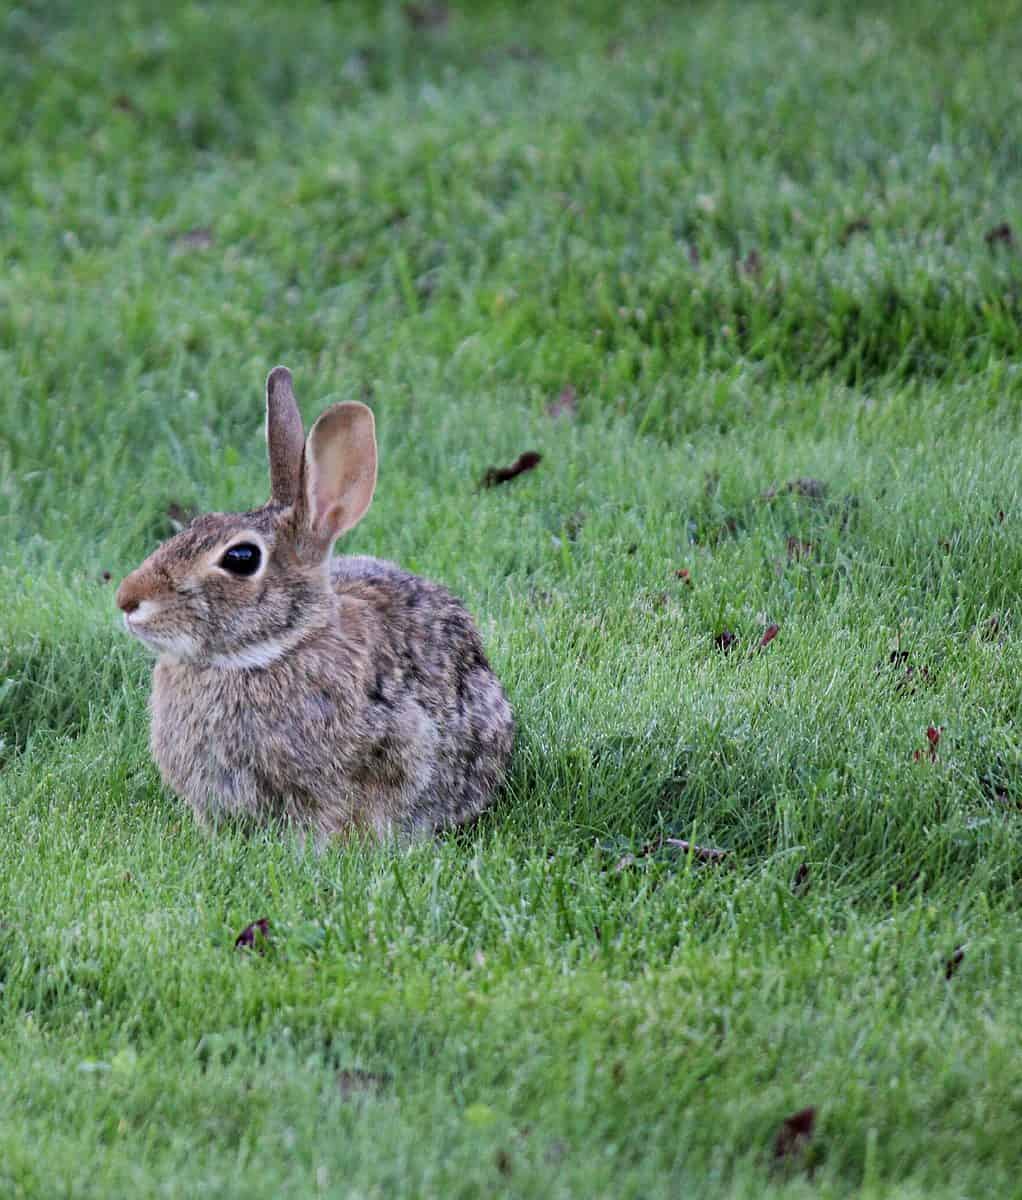 A cottontail rabbit in the grass